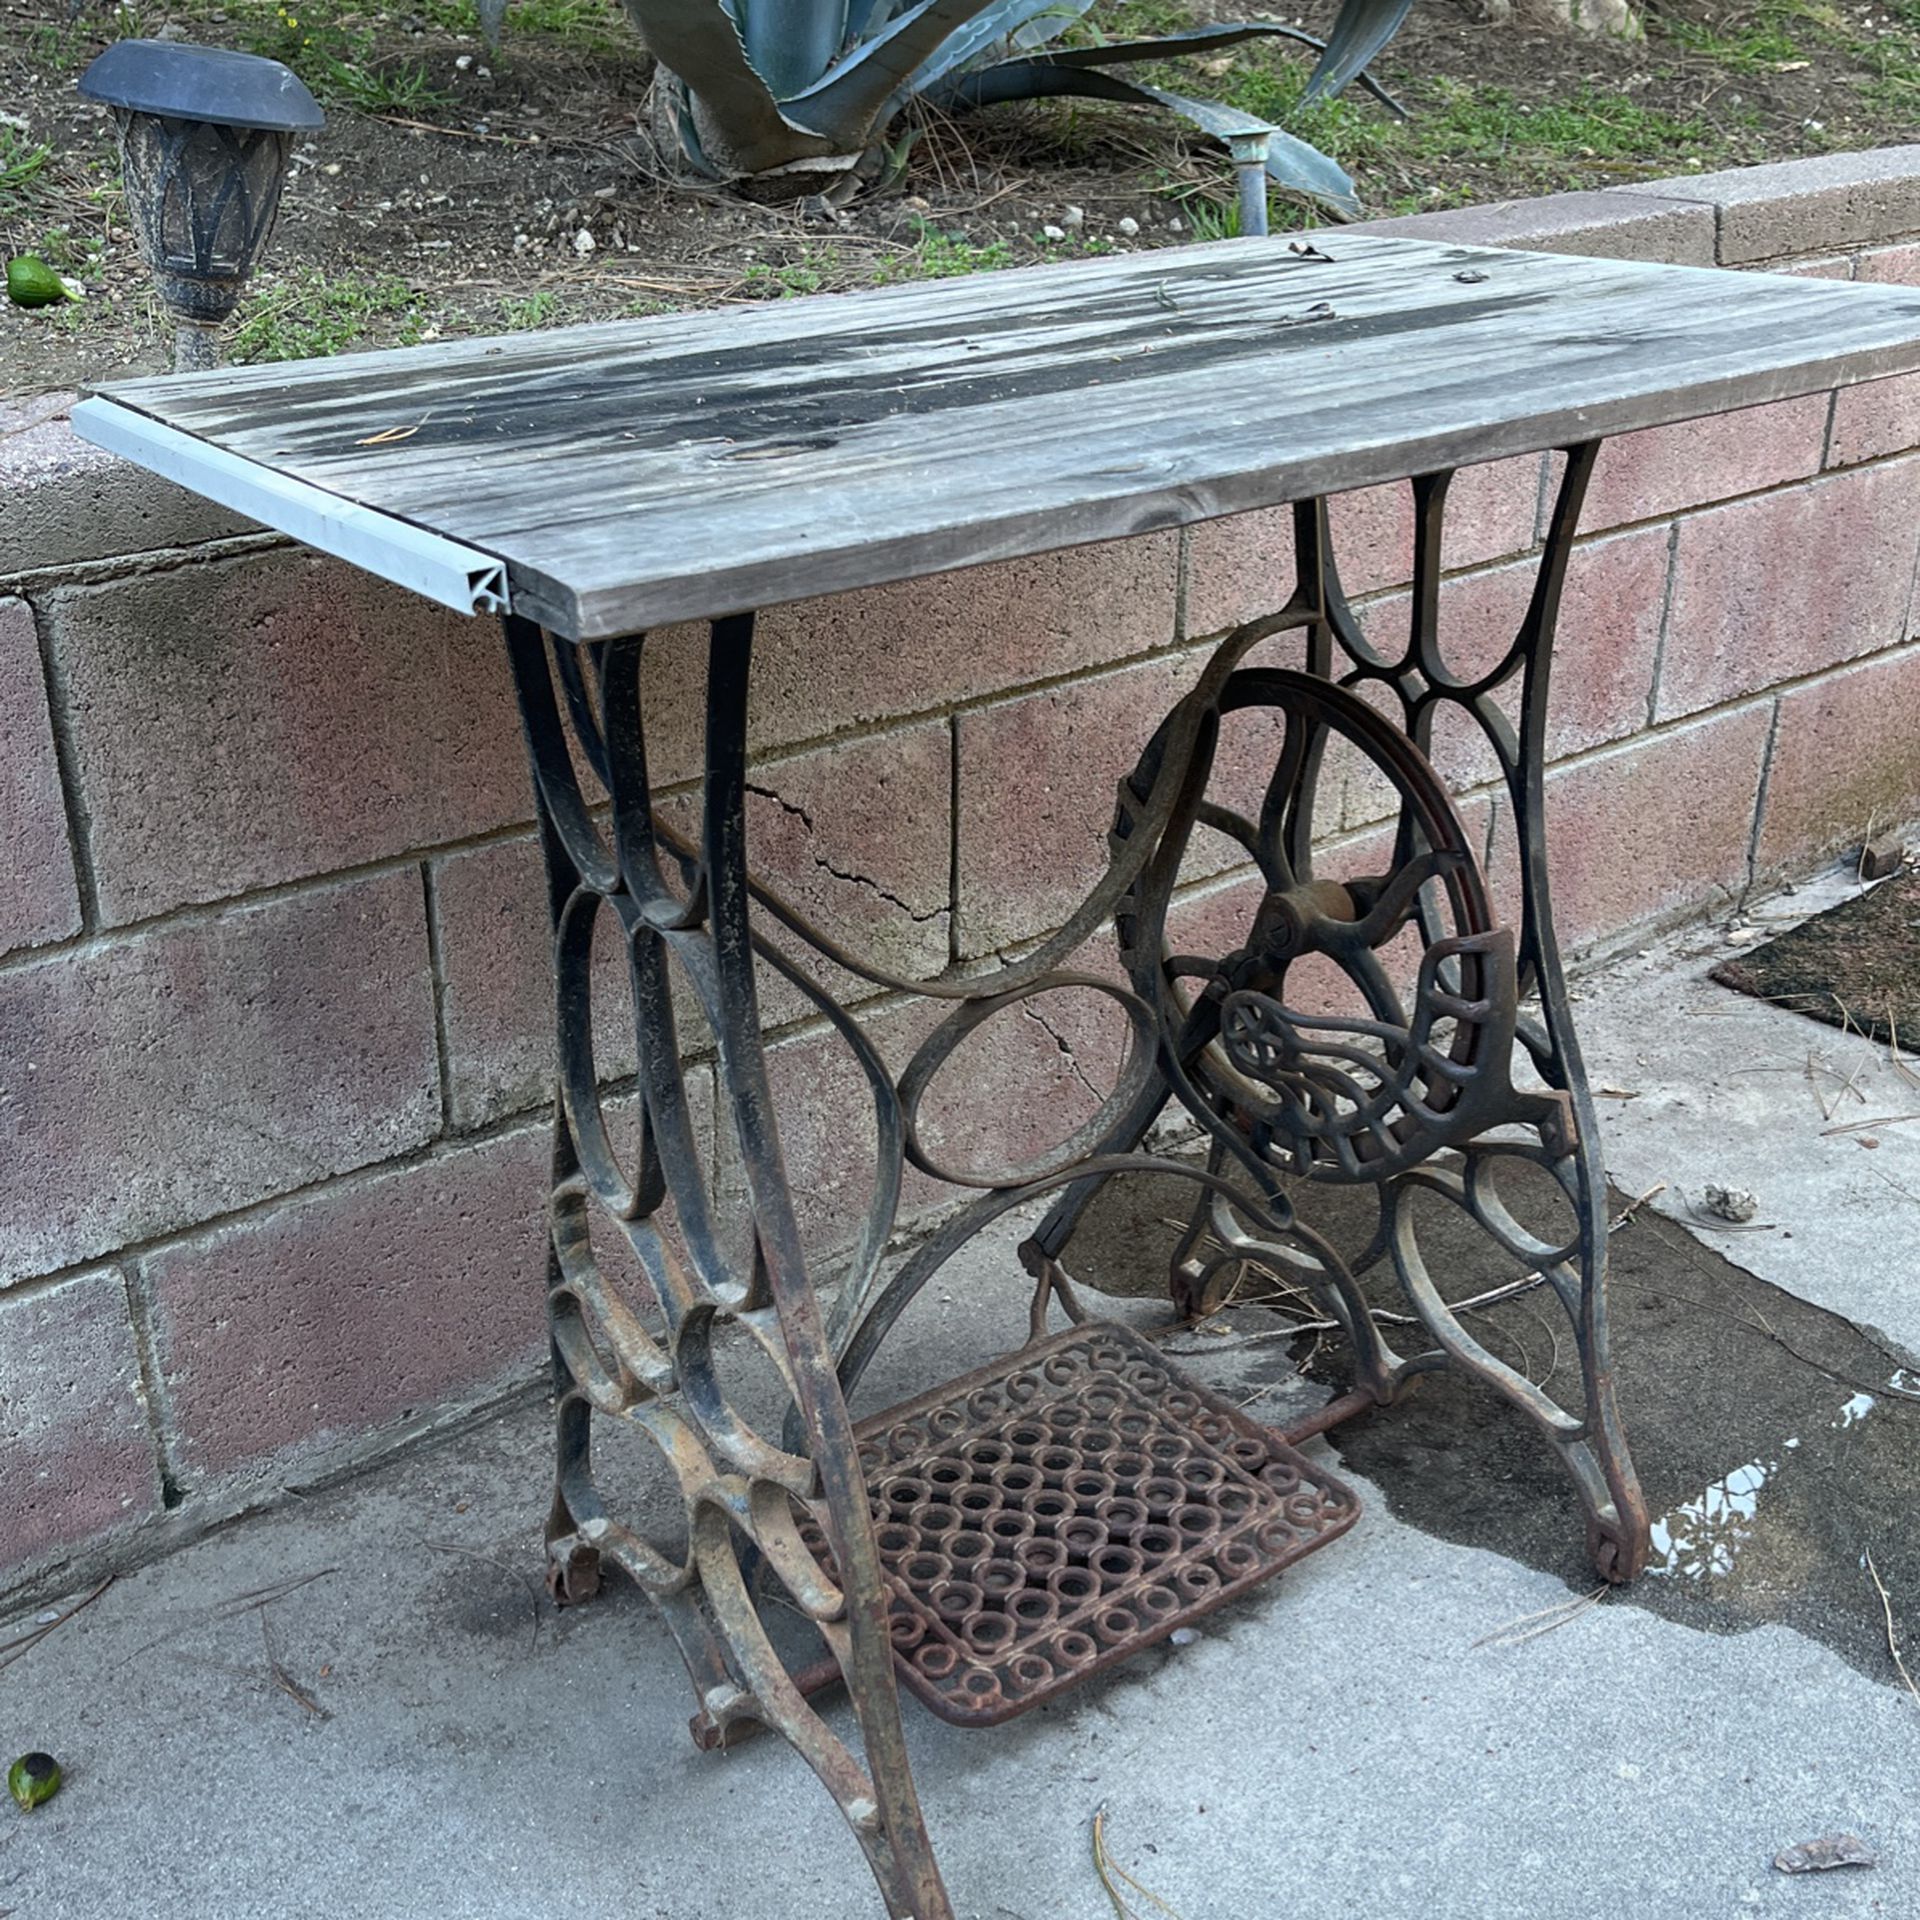 Old Sewing Machine Table